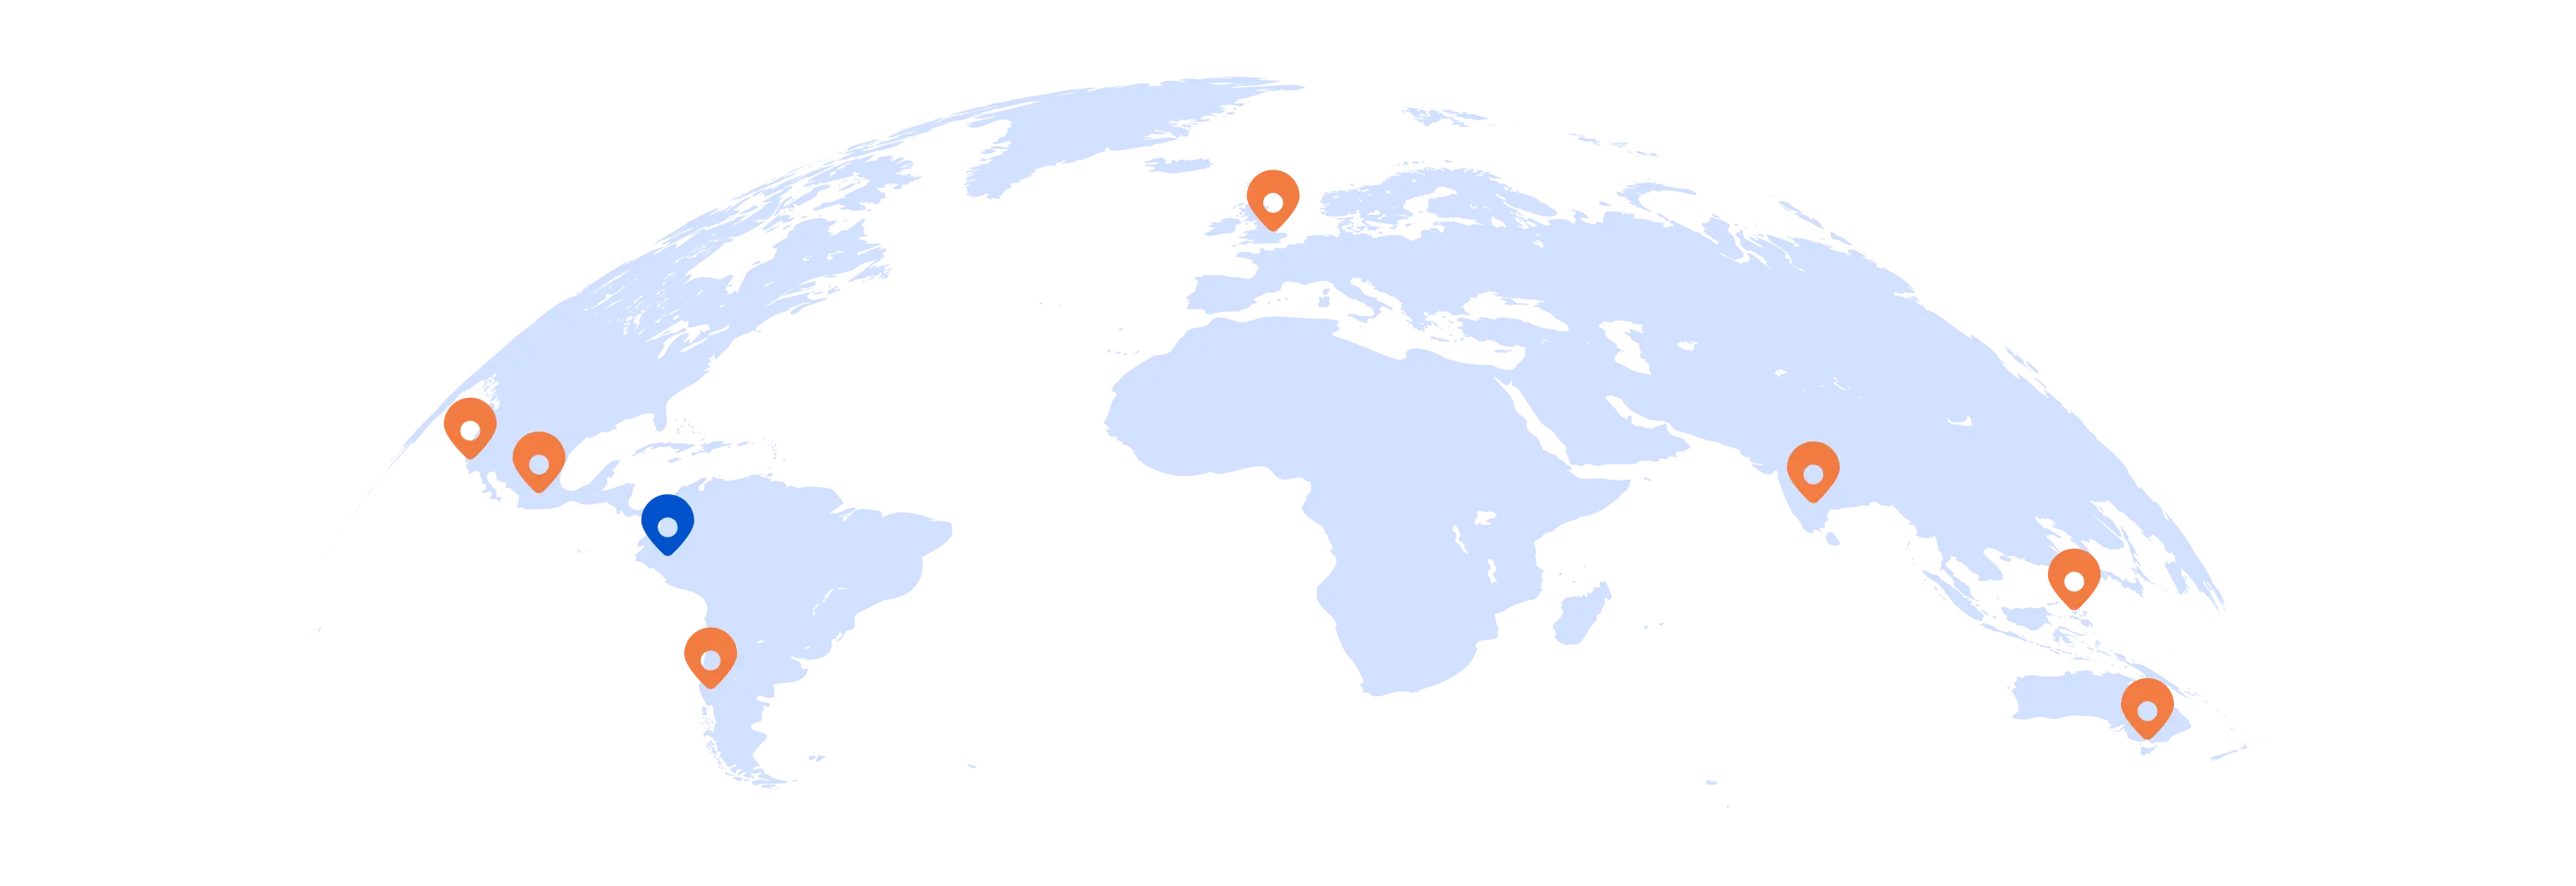 Map of DispatchTrack's global office locations